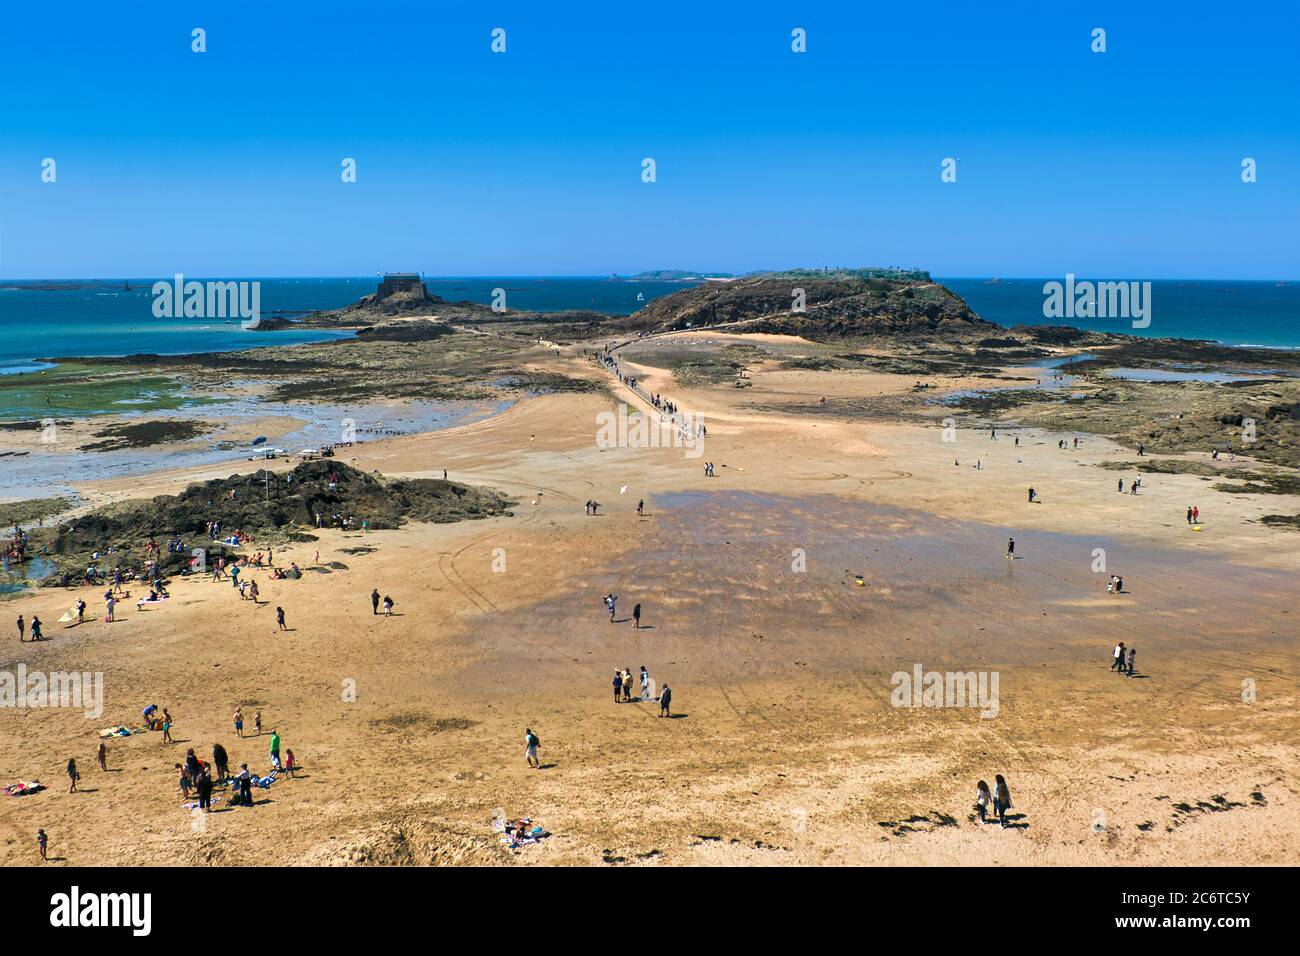 Saint Malo, Brittany, France, Europe. The beaches extend at the foot of the walls. At low tide, the sand dries up to the islands. Stock Photo